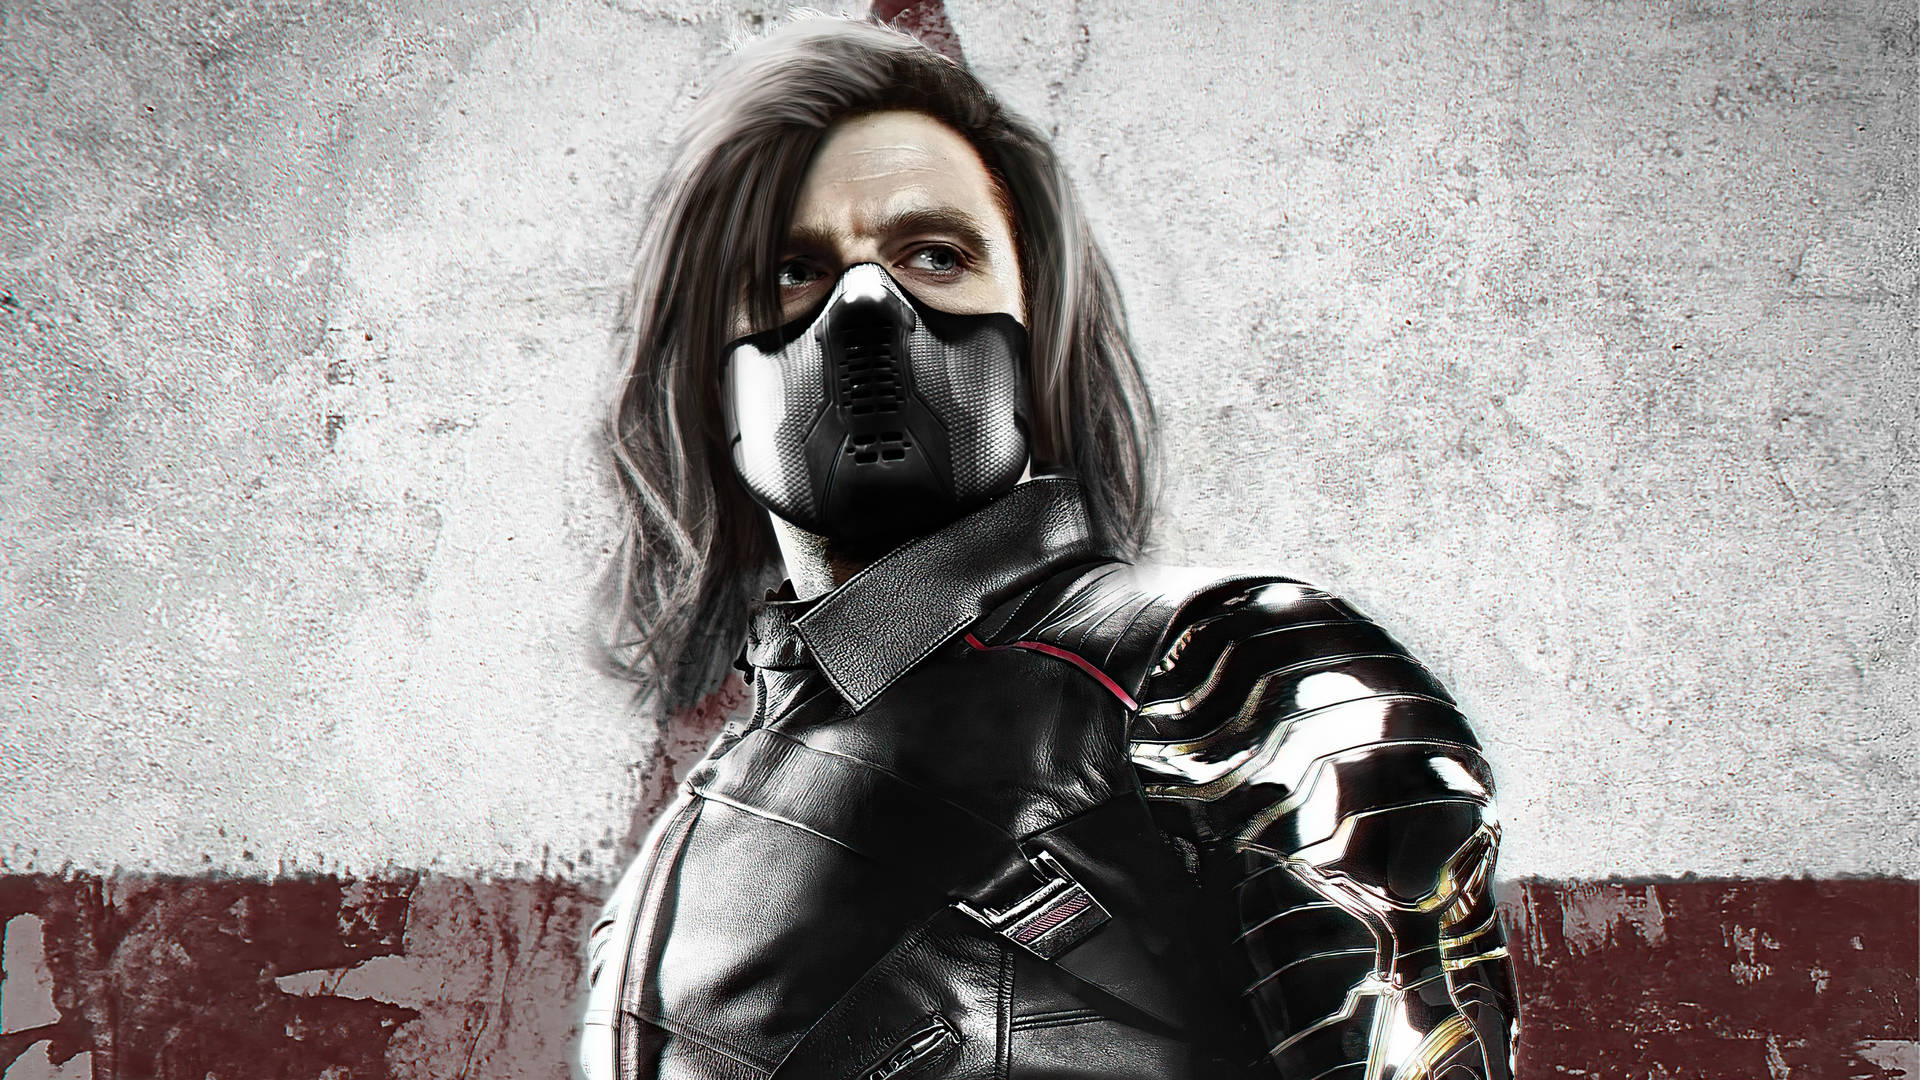 Winter Soldier With Mask Background